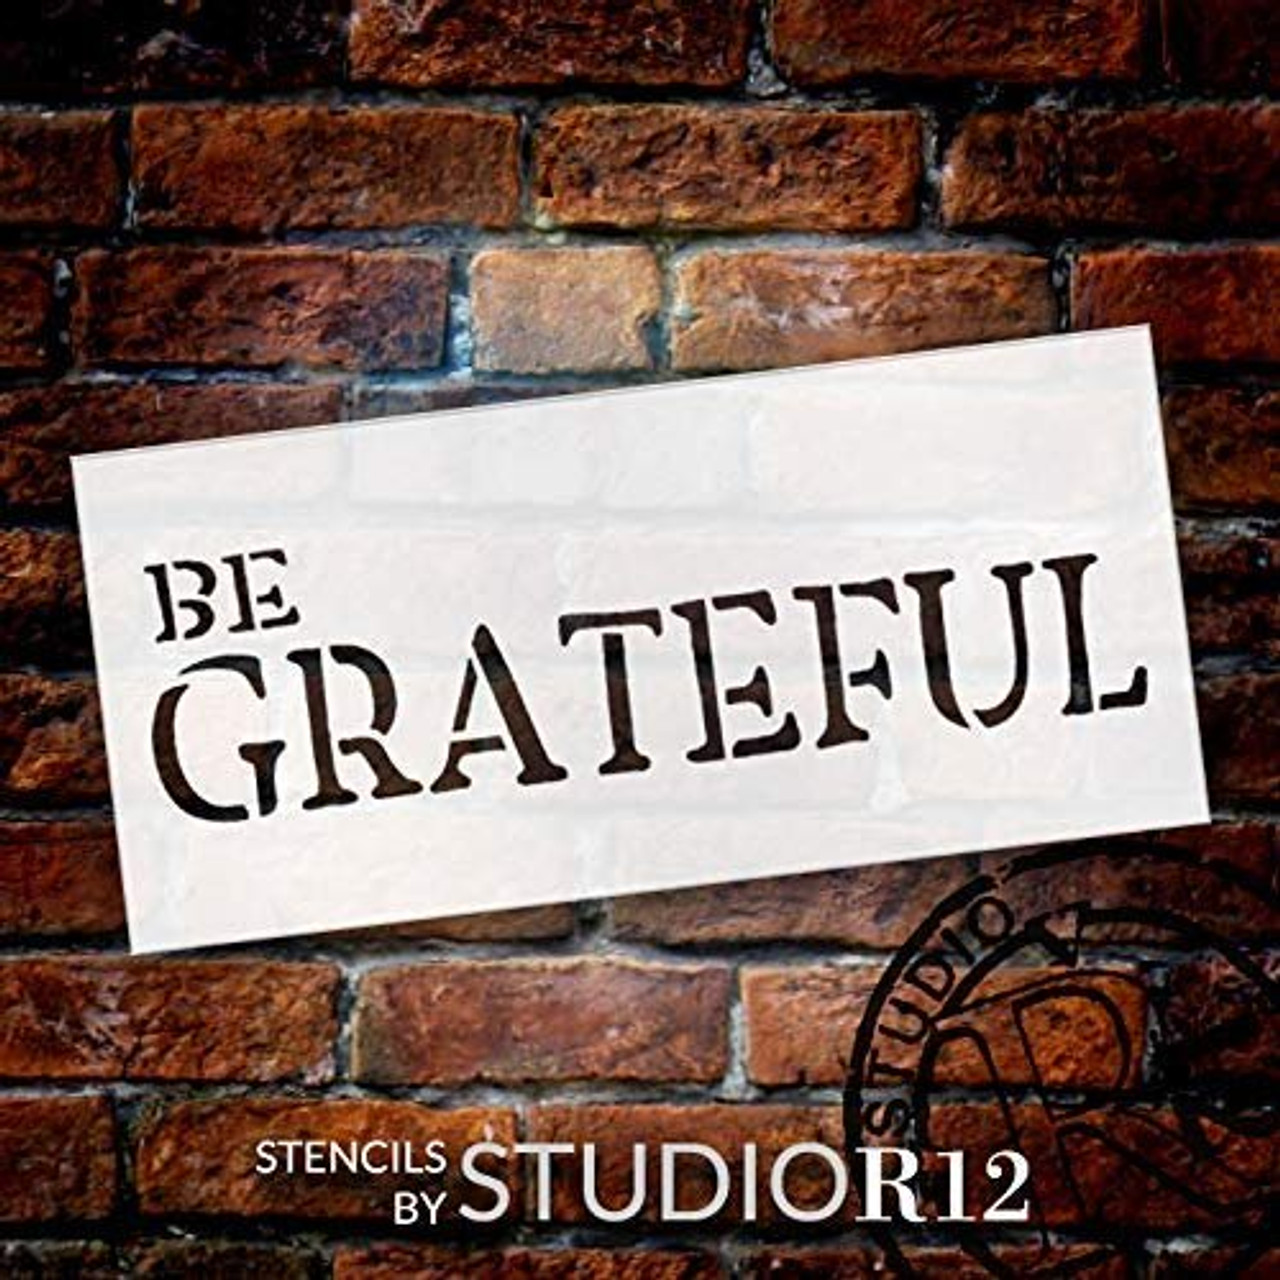 Be Grateful Stencil by StudioR12 | DIY Rustic Fall Farmhouse Home Decor | Autumn Harvest Word Art for Family Room | Craft & Paint Wood Signs | Reusable Mylar Template | Select Size